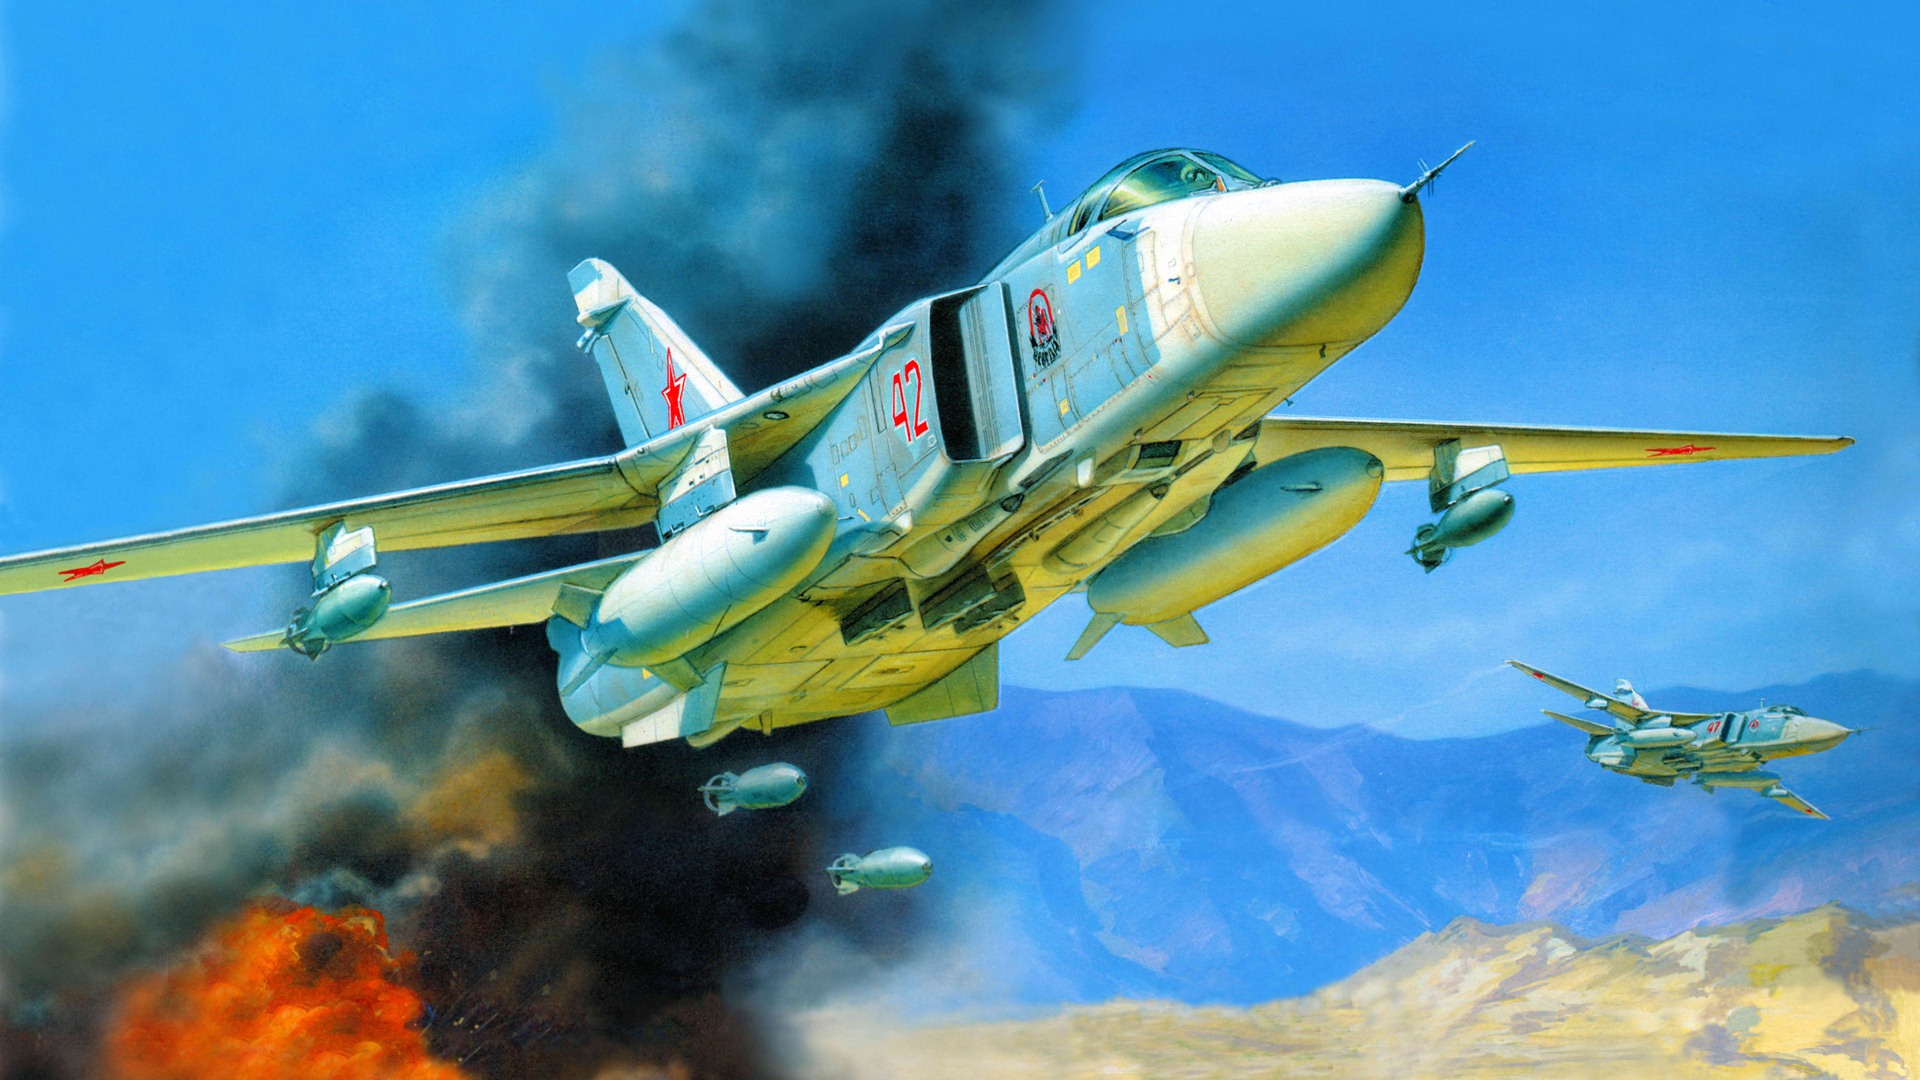 Military aircraft flight exquisite painting wallpapers #3 - 1920x1080